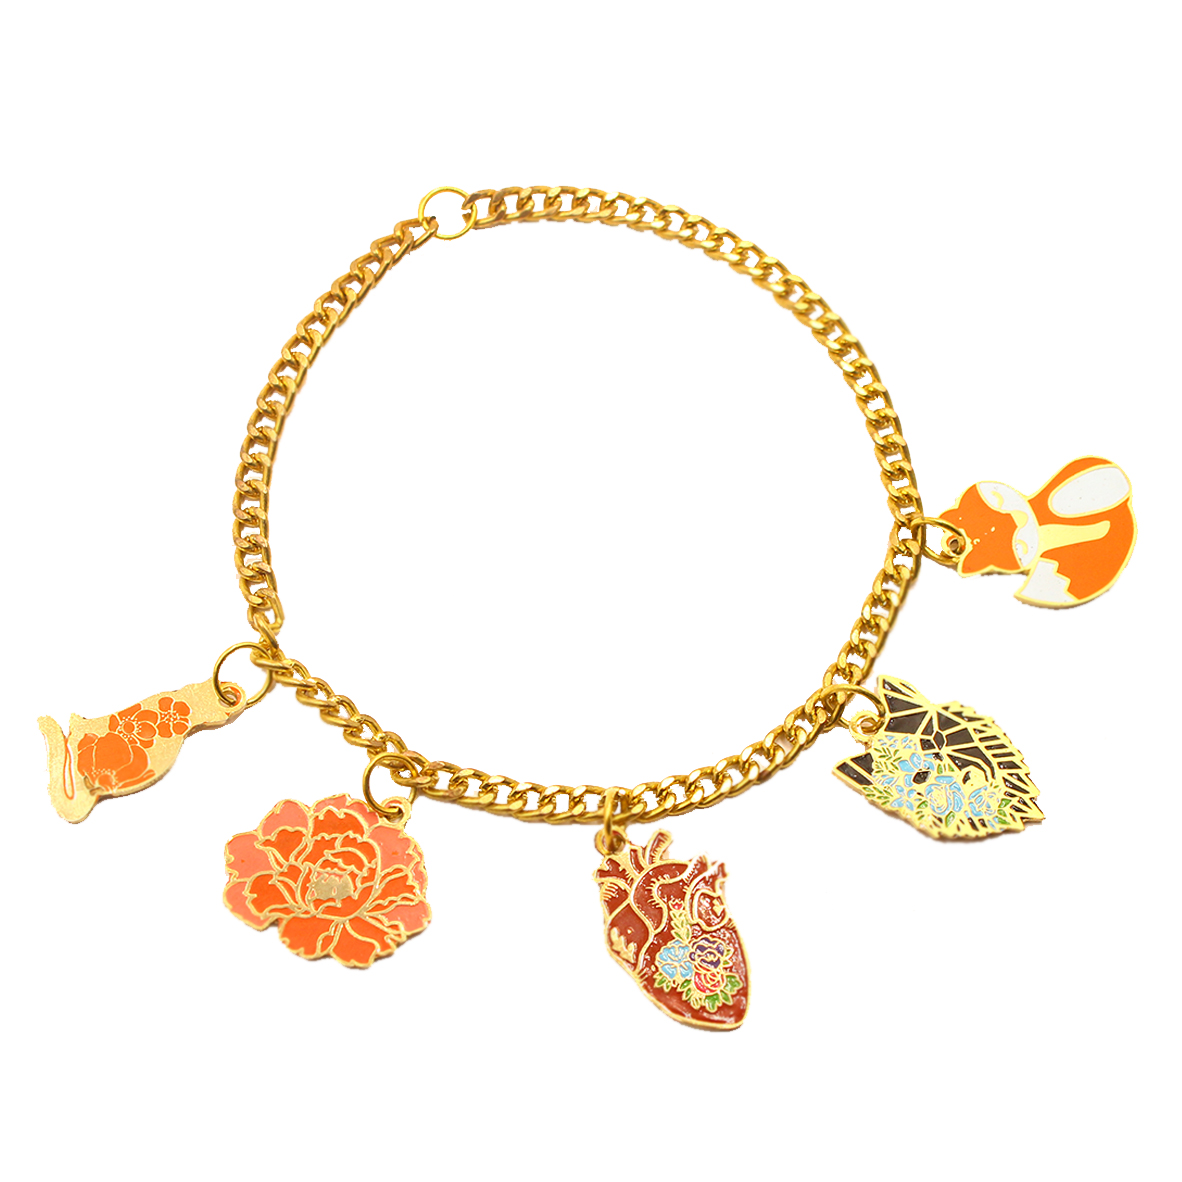 Get Personalized Charm Bracelet Online in India  Nutcase